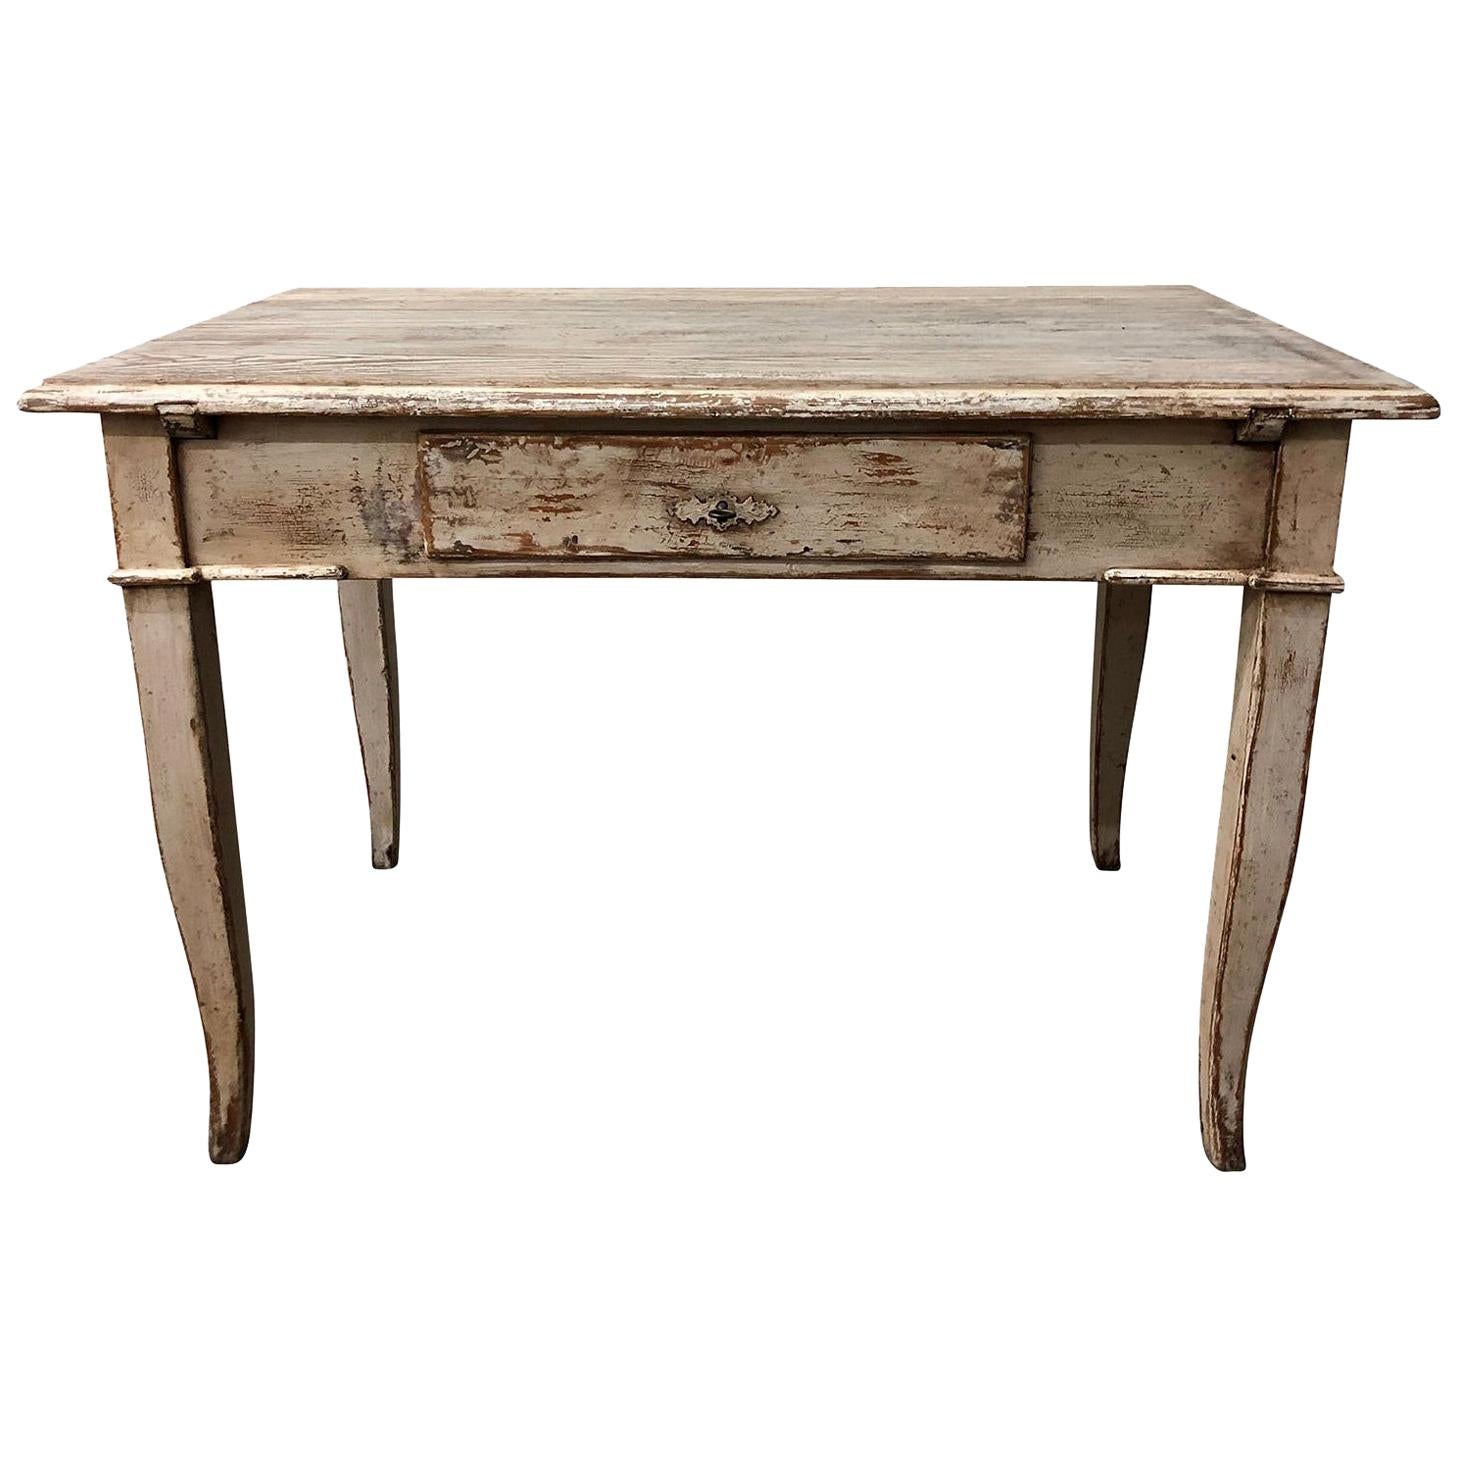 19th Century French Provincial Walnut End Table, Painted Wooden Farm Table